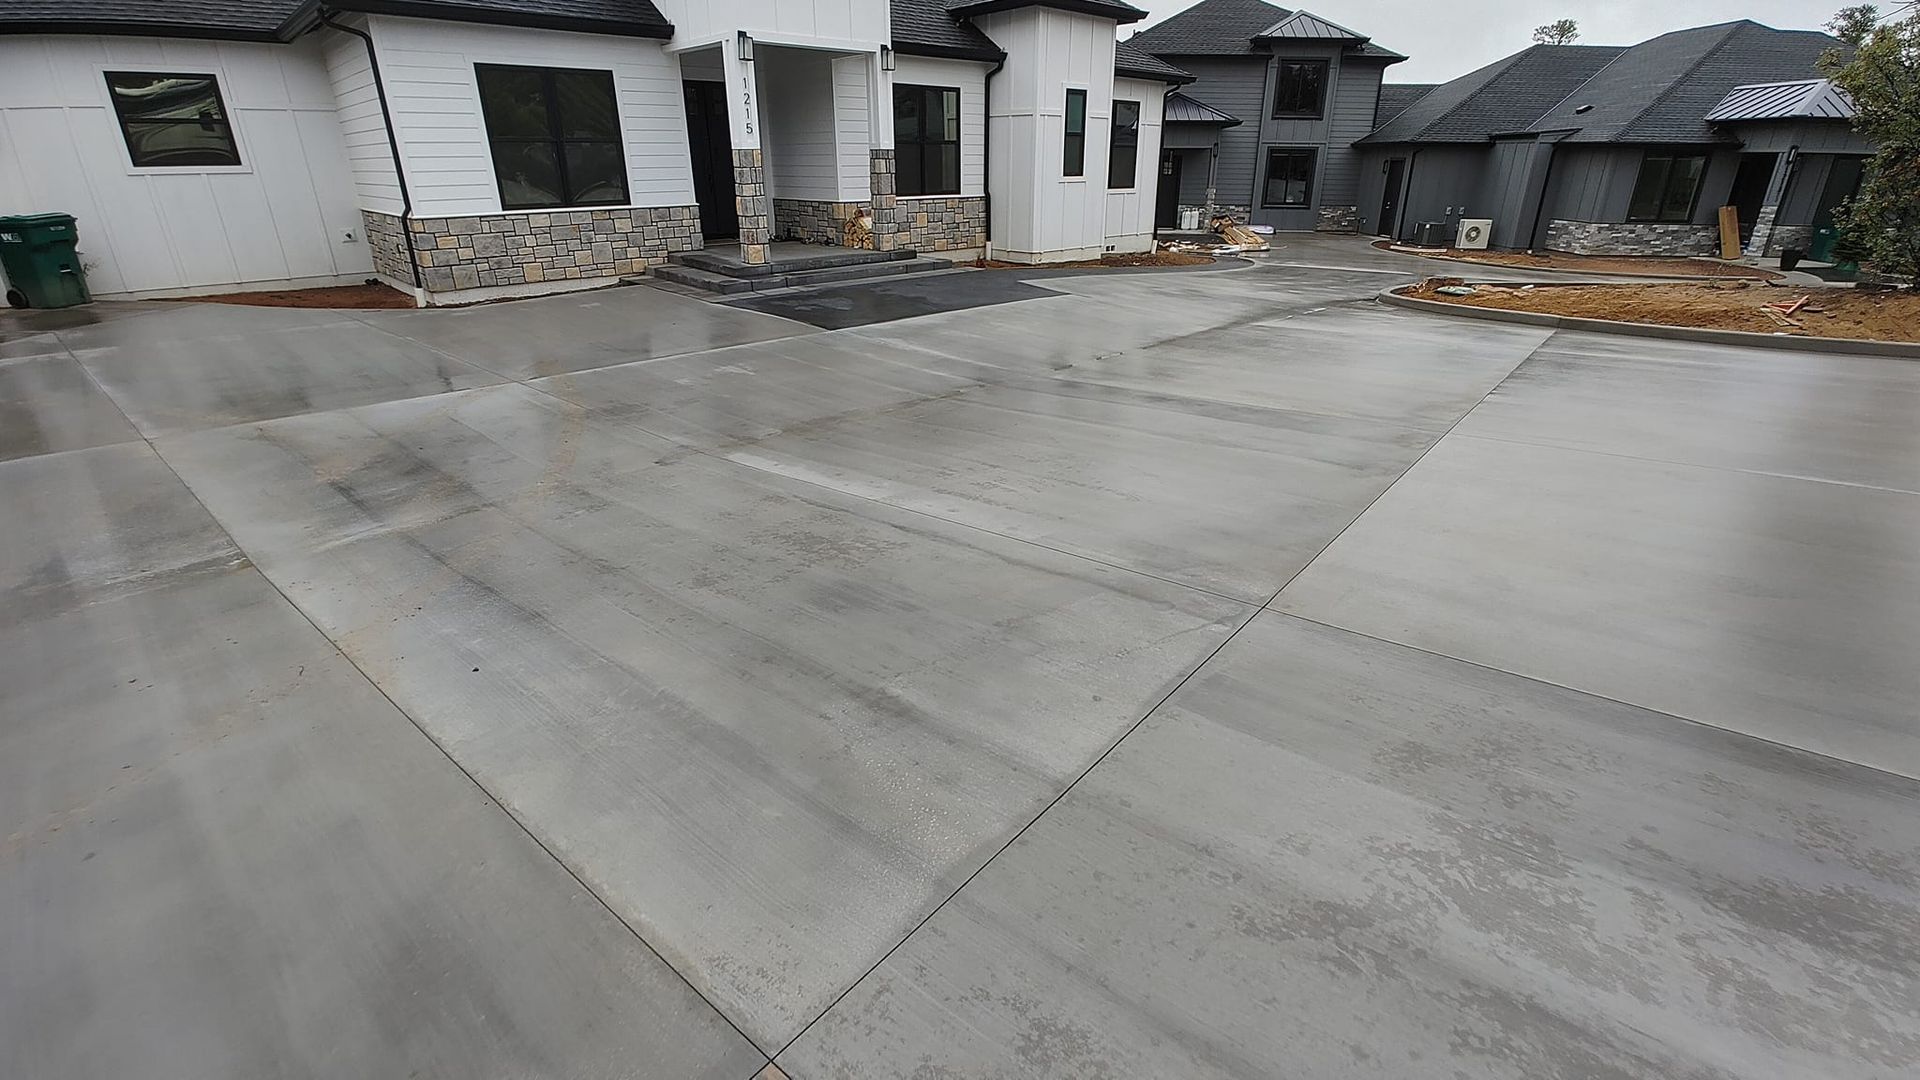 Concrete driveway with smooth finish